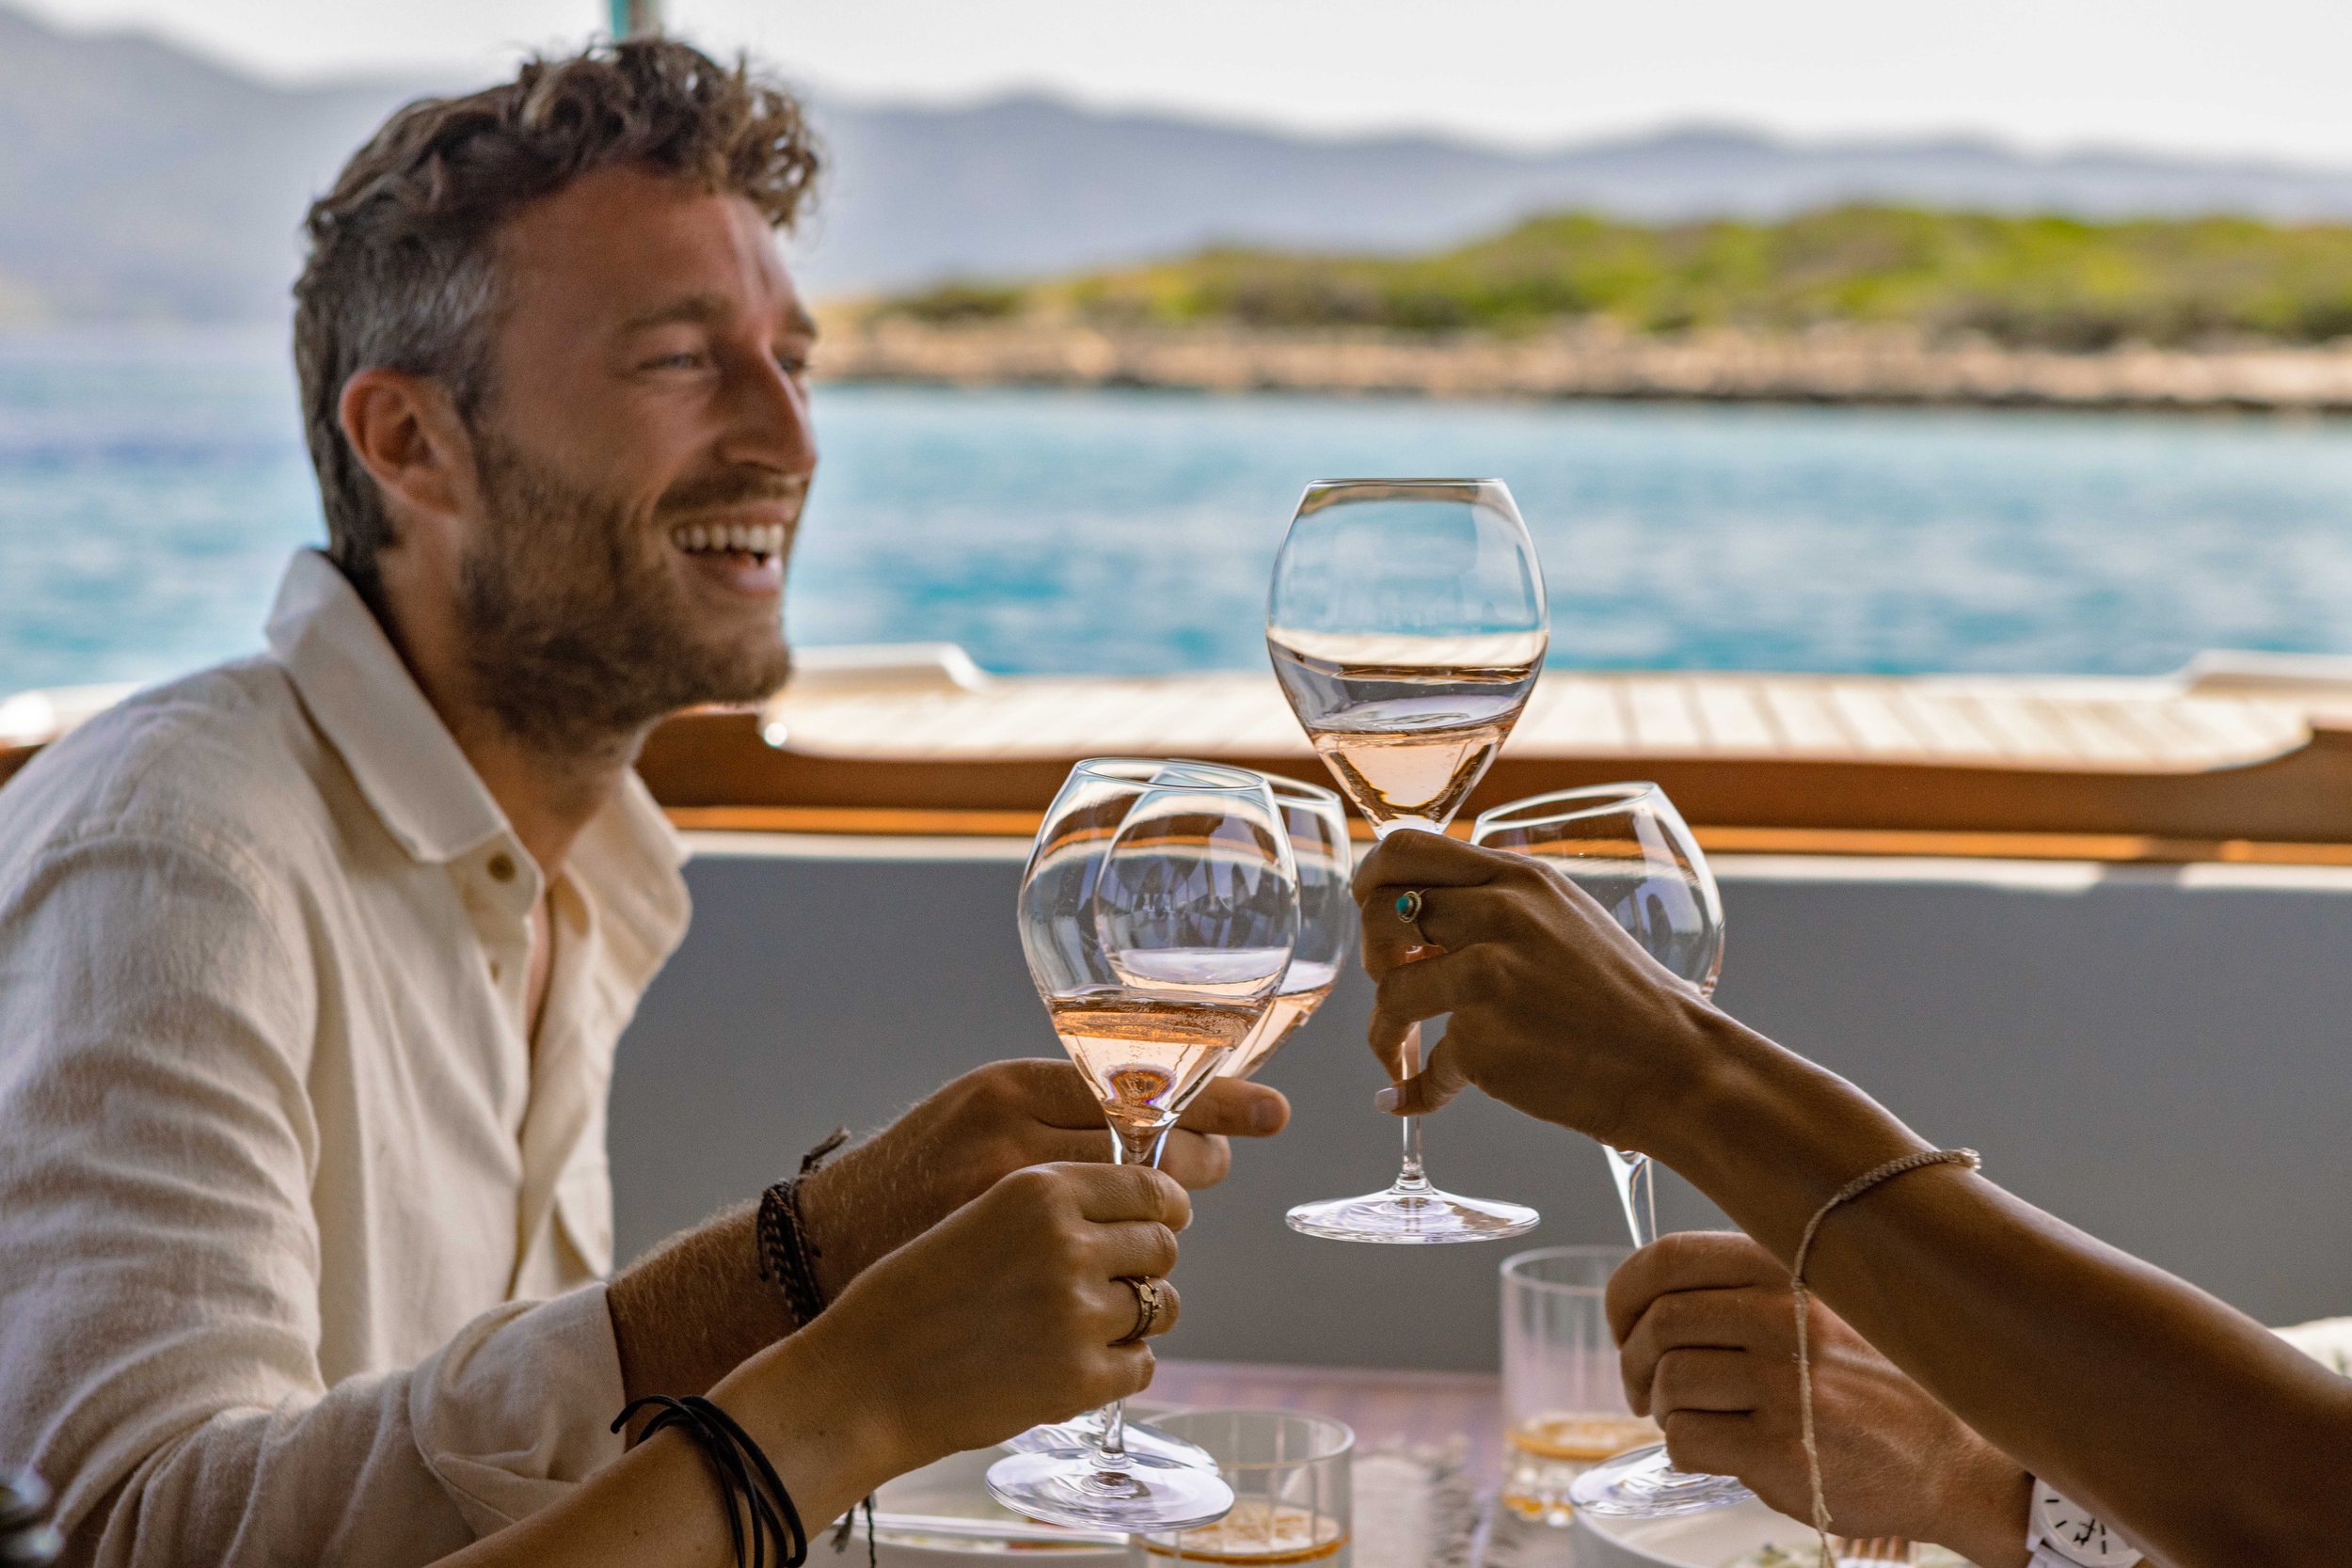 Image of frineds enjoying wine in a restaurant with panoramic sea view